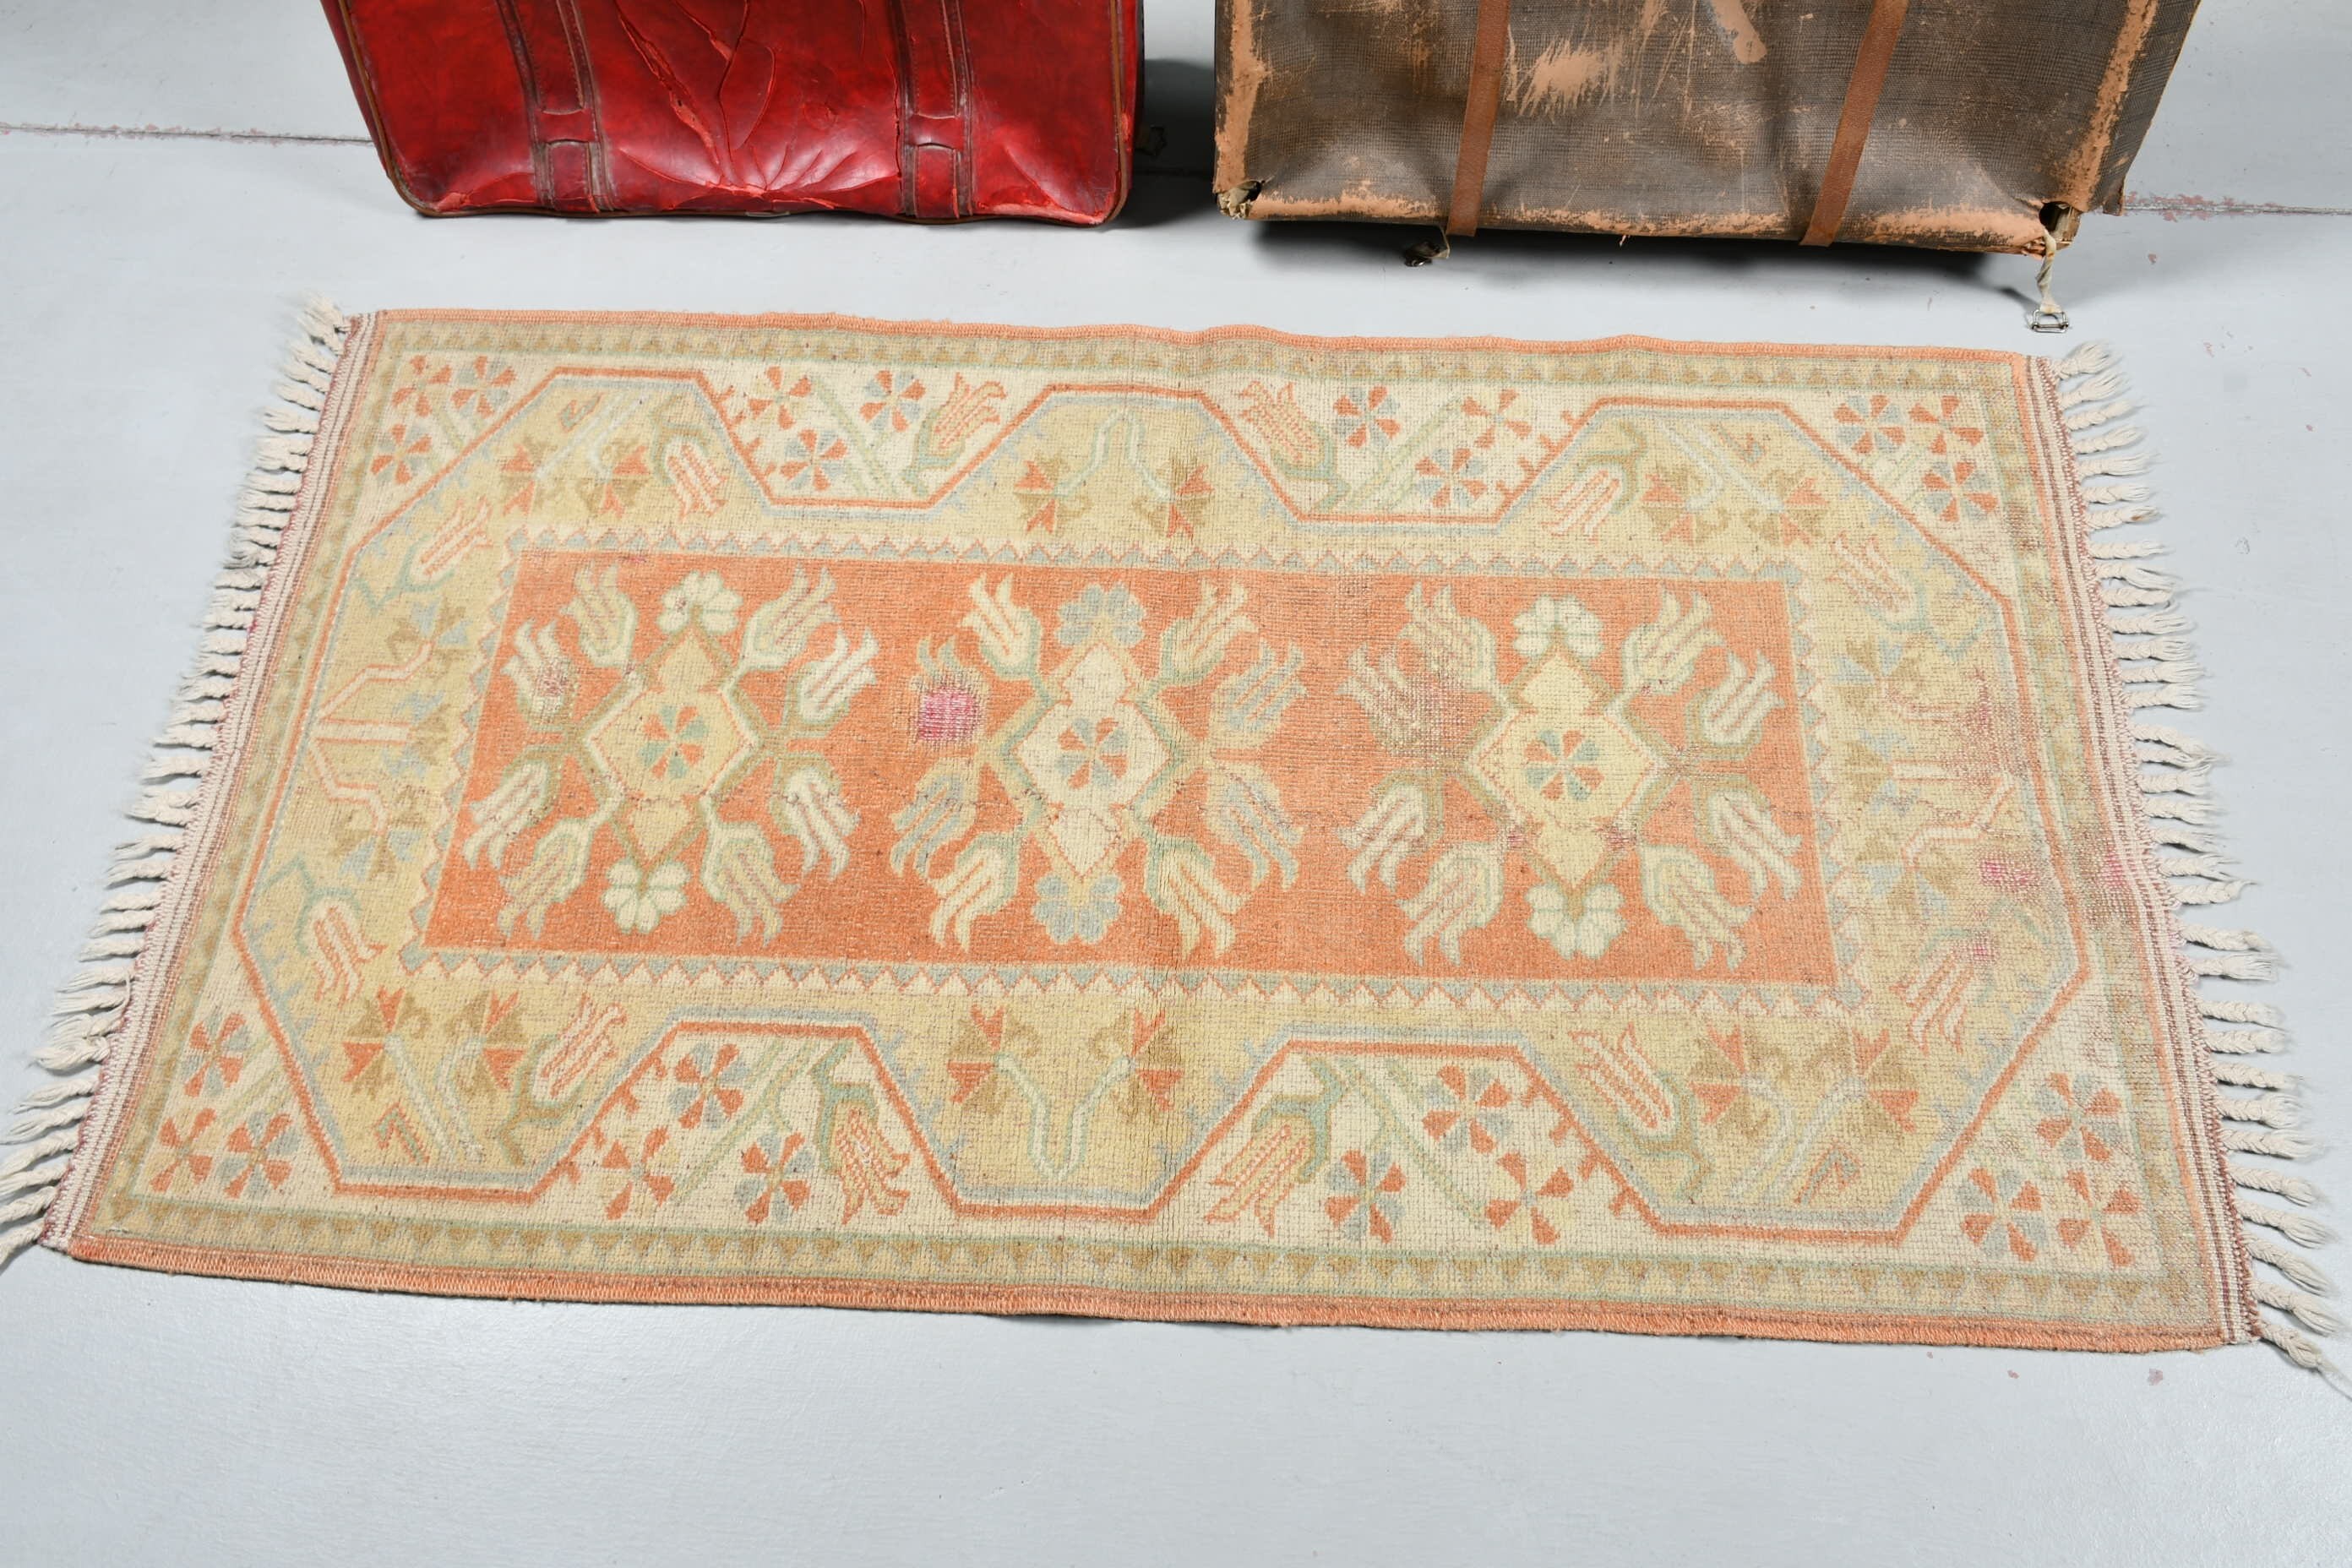 Entry Rugs, Rugs for Entry, 2.7x4.7 ft Small Rugs, Turkish Rug, Kitchen Rug, Orange Moroccan Rugs, Home Decor Rug, Bath Rug, Vintage Rugs